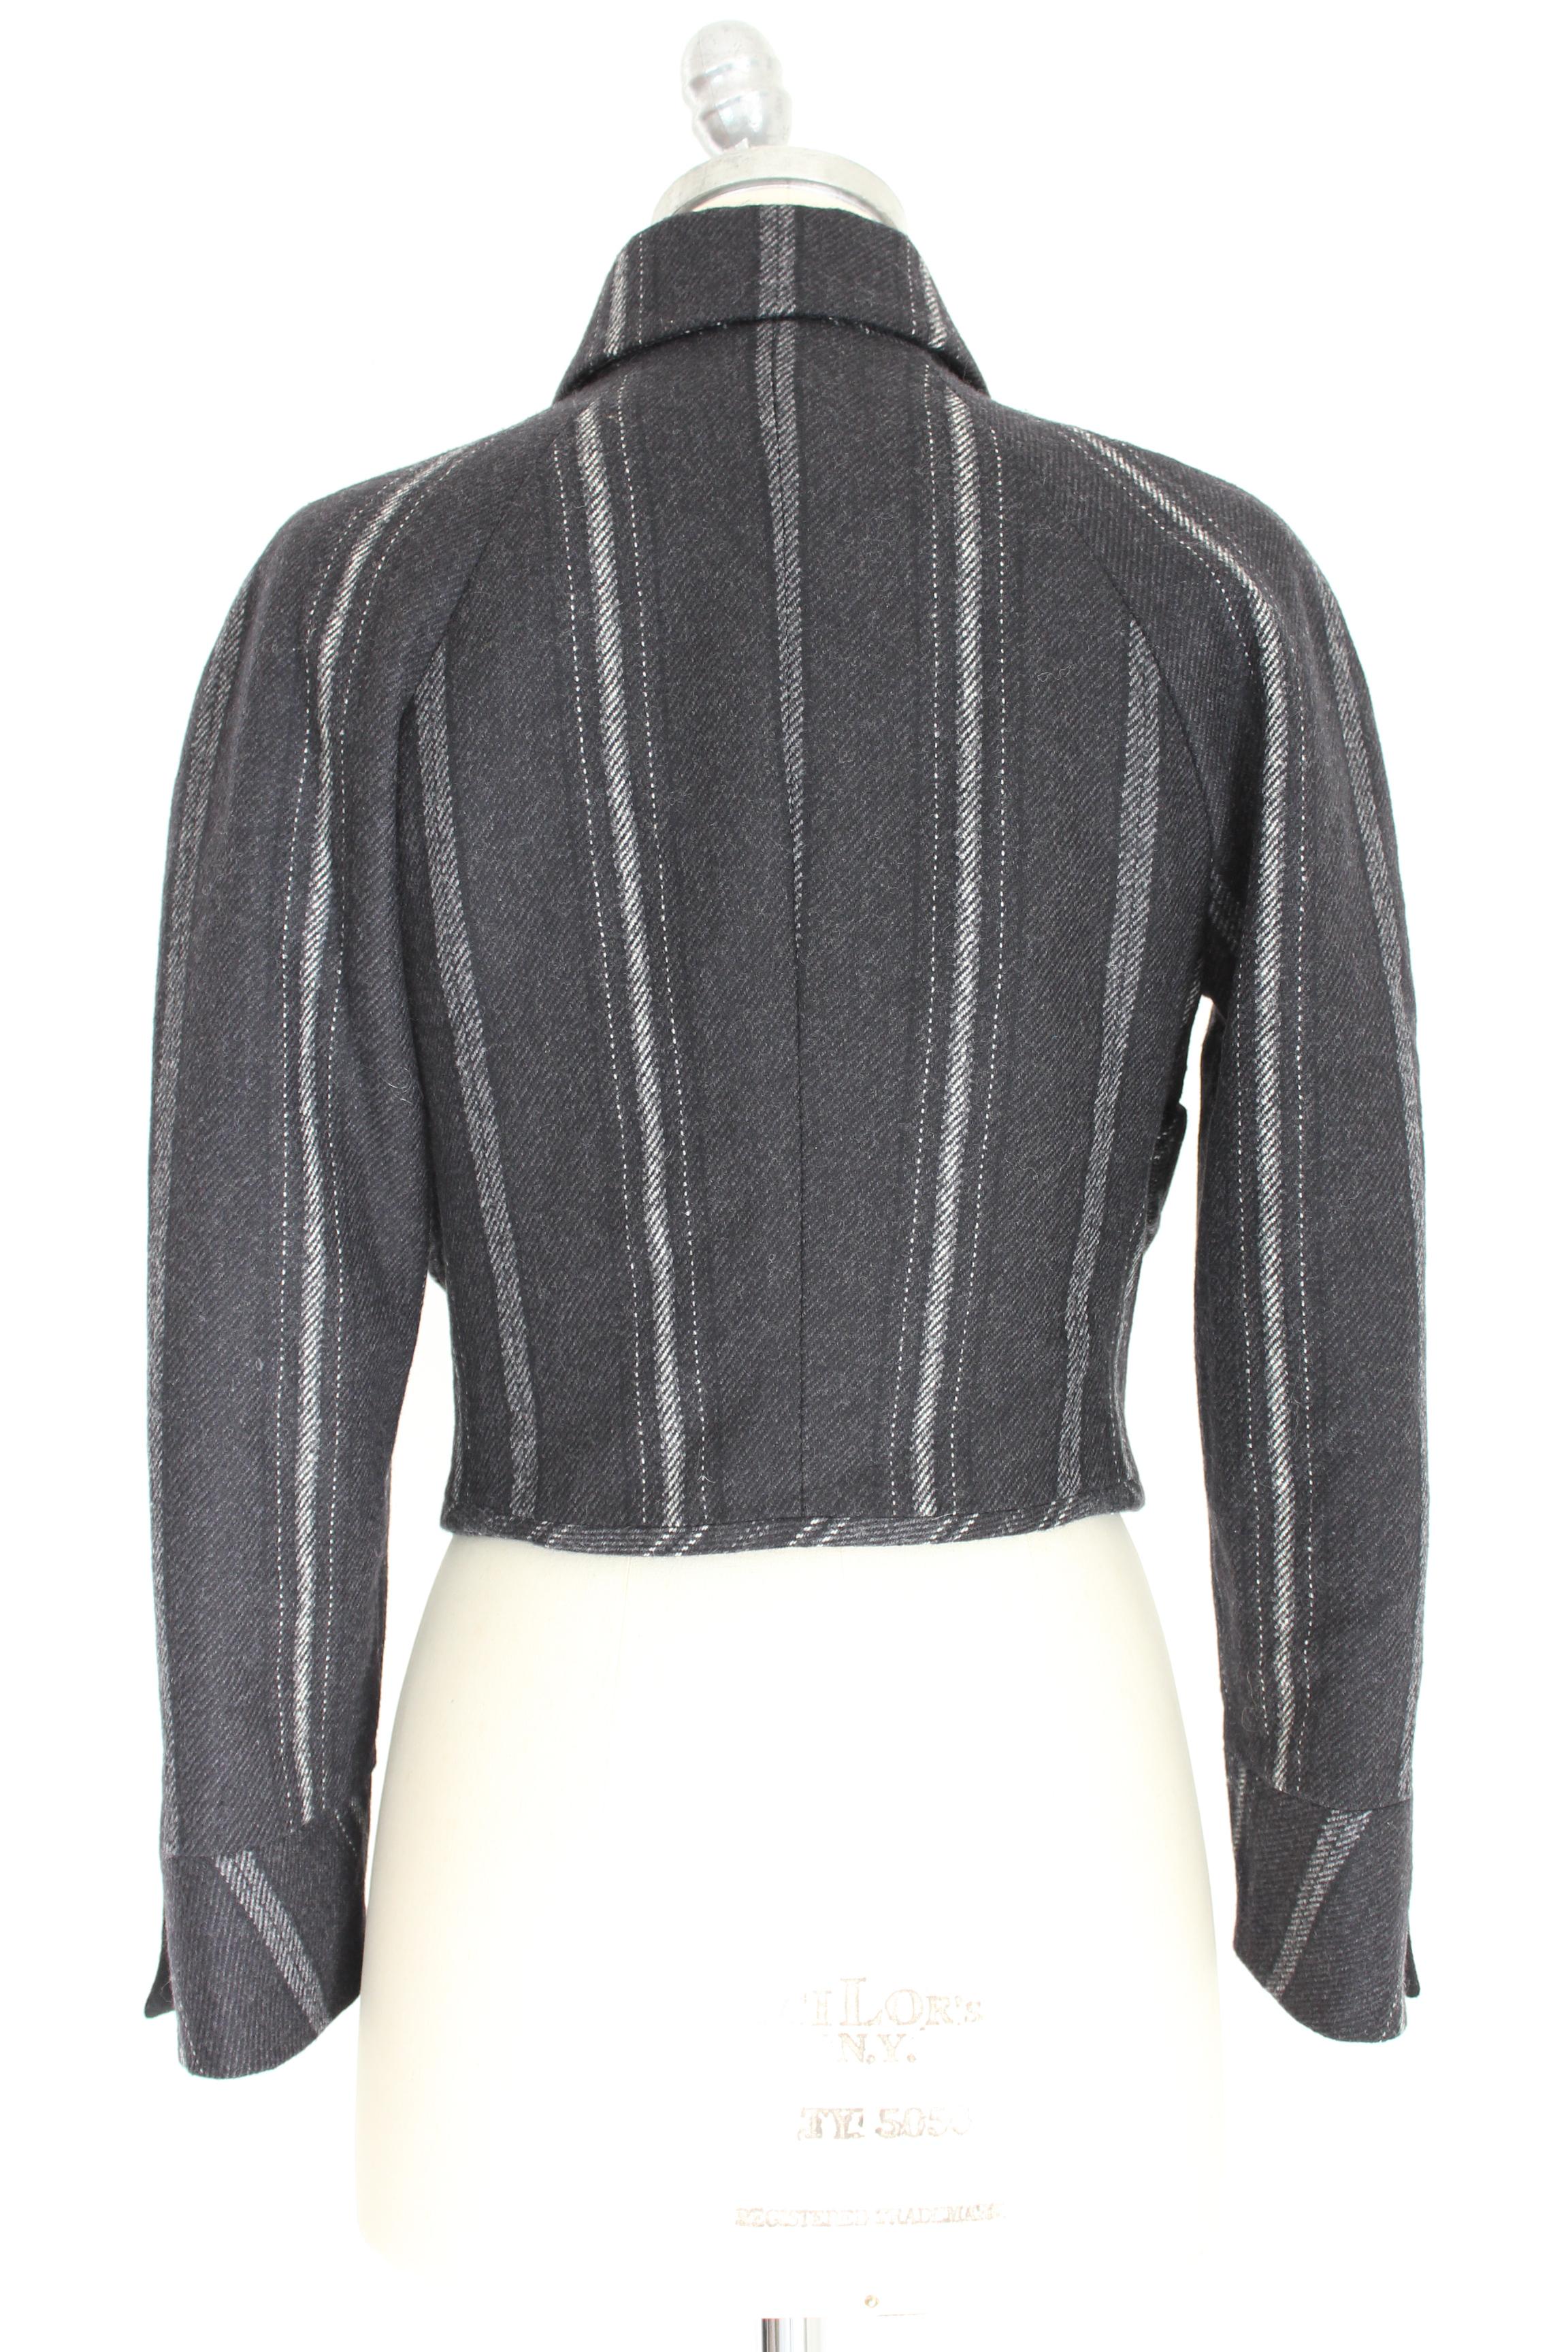 Gianni Versace Couture vintage 90s women's jacket. Bolero model, double-breasted short waist, dark gray and light pinstripe. Wool fabric, lined interior. Made in Italy. Excellent vintage condition.

Size:  40 It 6 Us 8 Uk 



Shoulder: 40 cm
Bust /